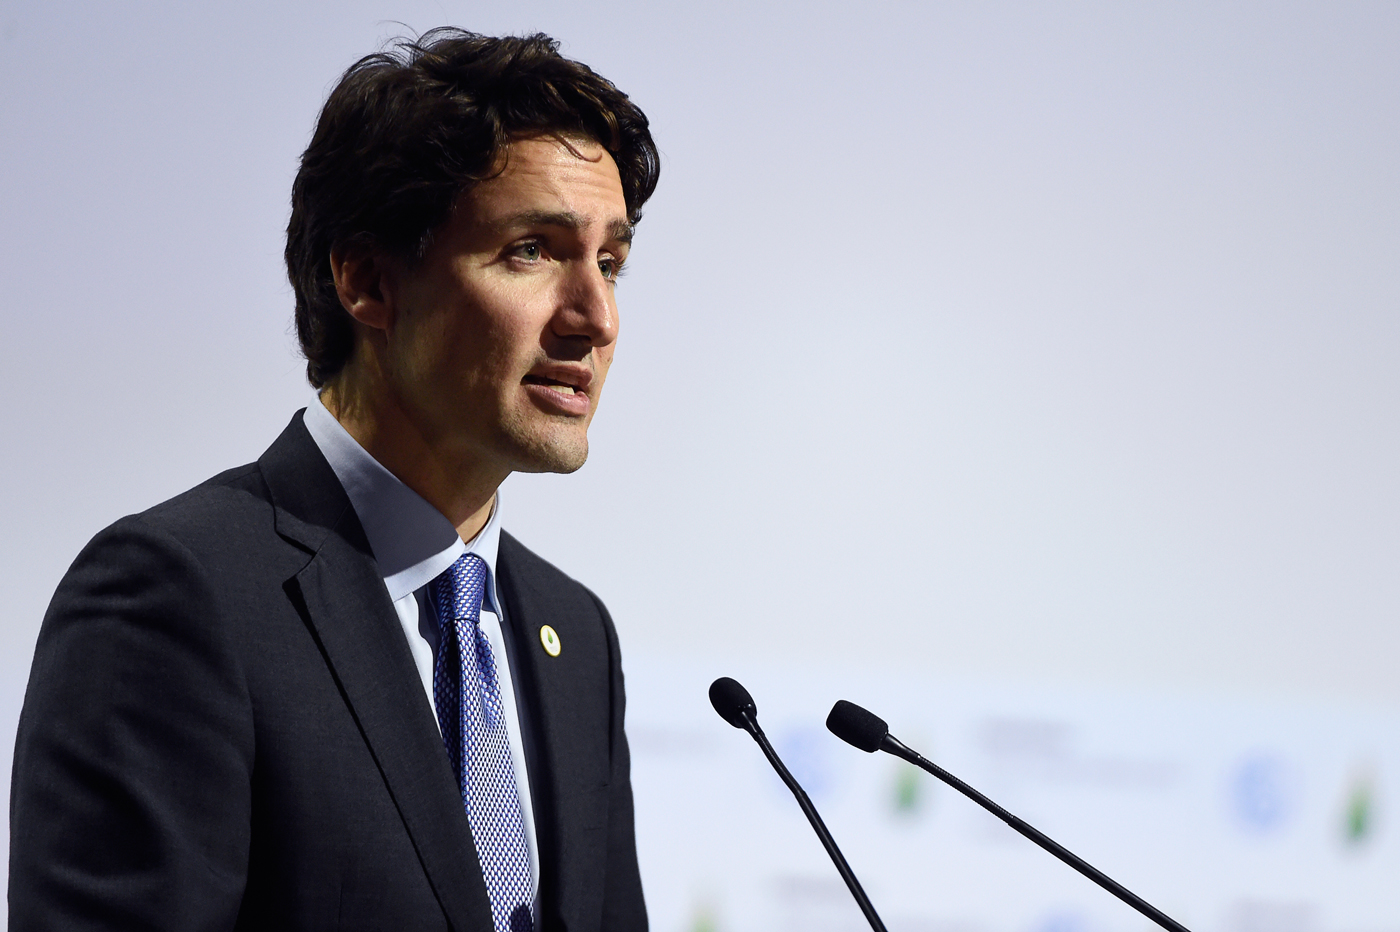 Justin Trudeau, speaking at the UN's COP 21 climate conference in Paris last year.